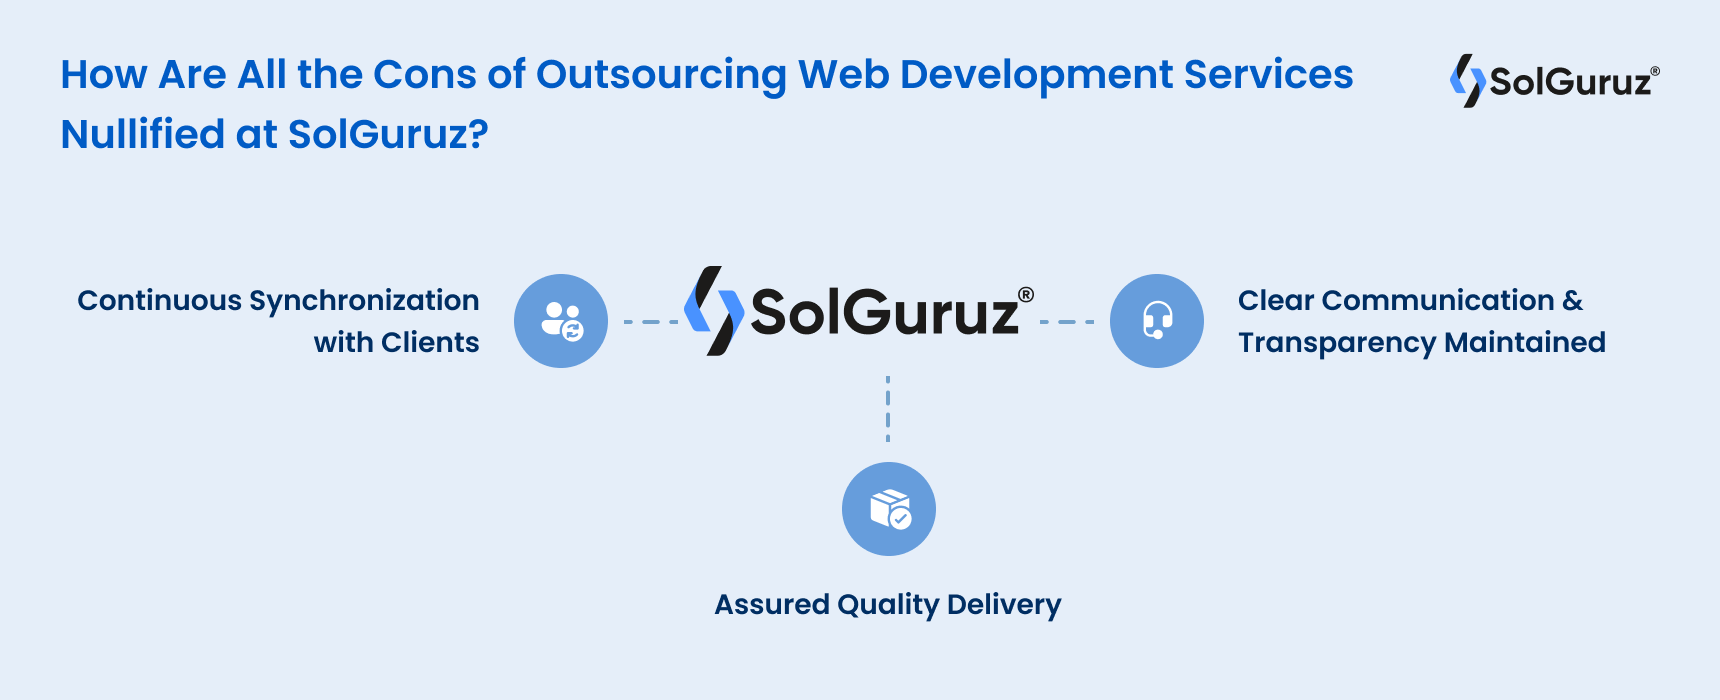 How Are All the Cons of Outsourcing Web Development Services Nullified at SolGuruz